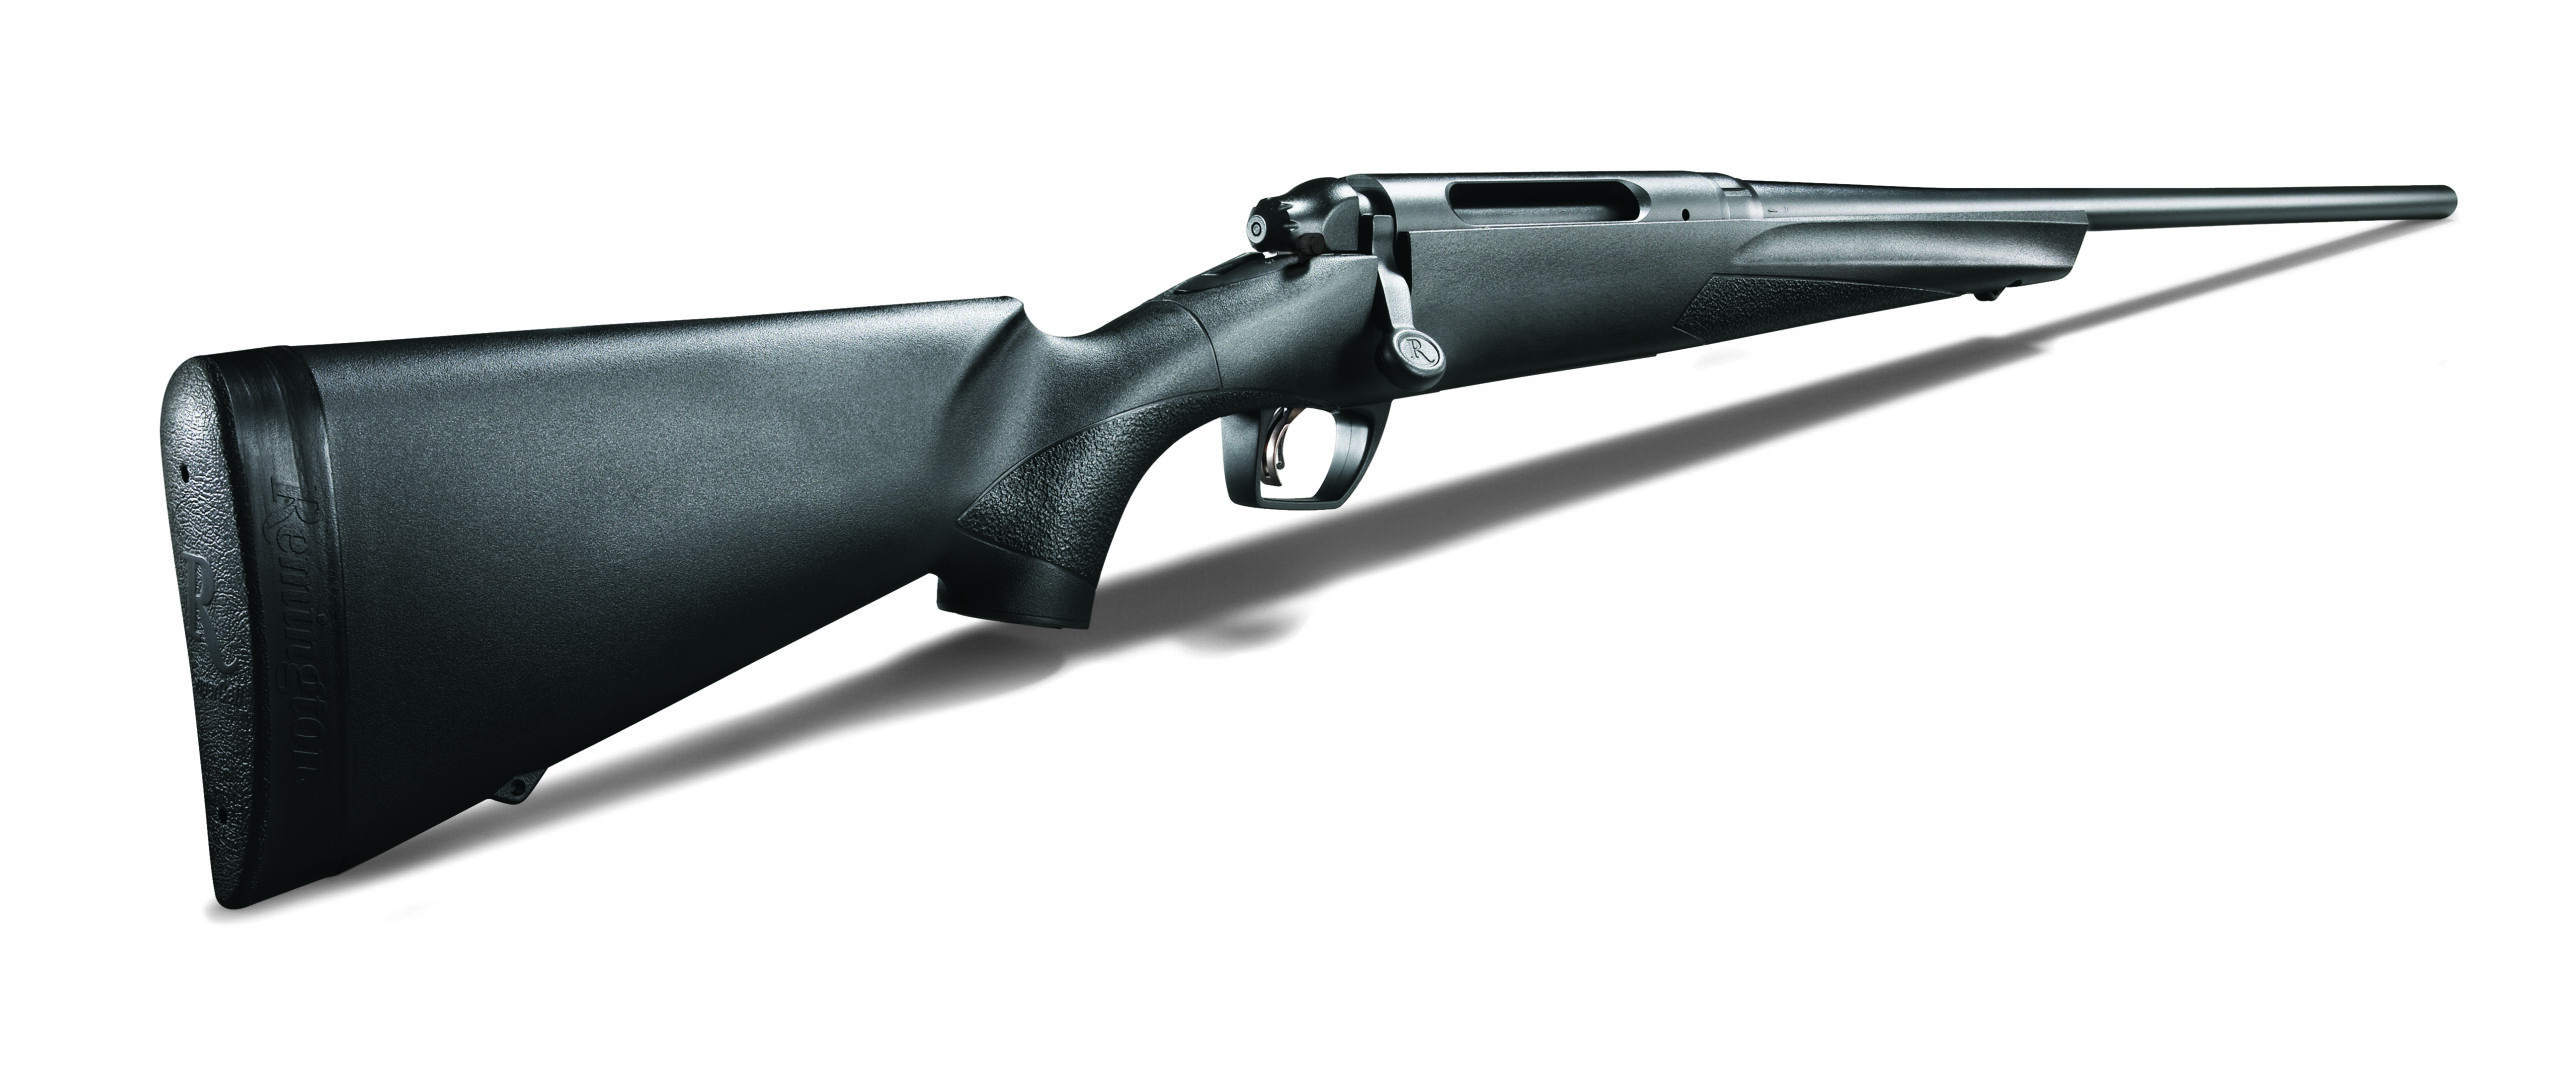 Remington's Full-Featured Budget Bolt-Action Model 783 is Reborn!